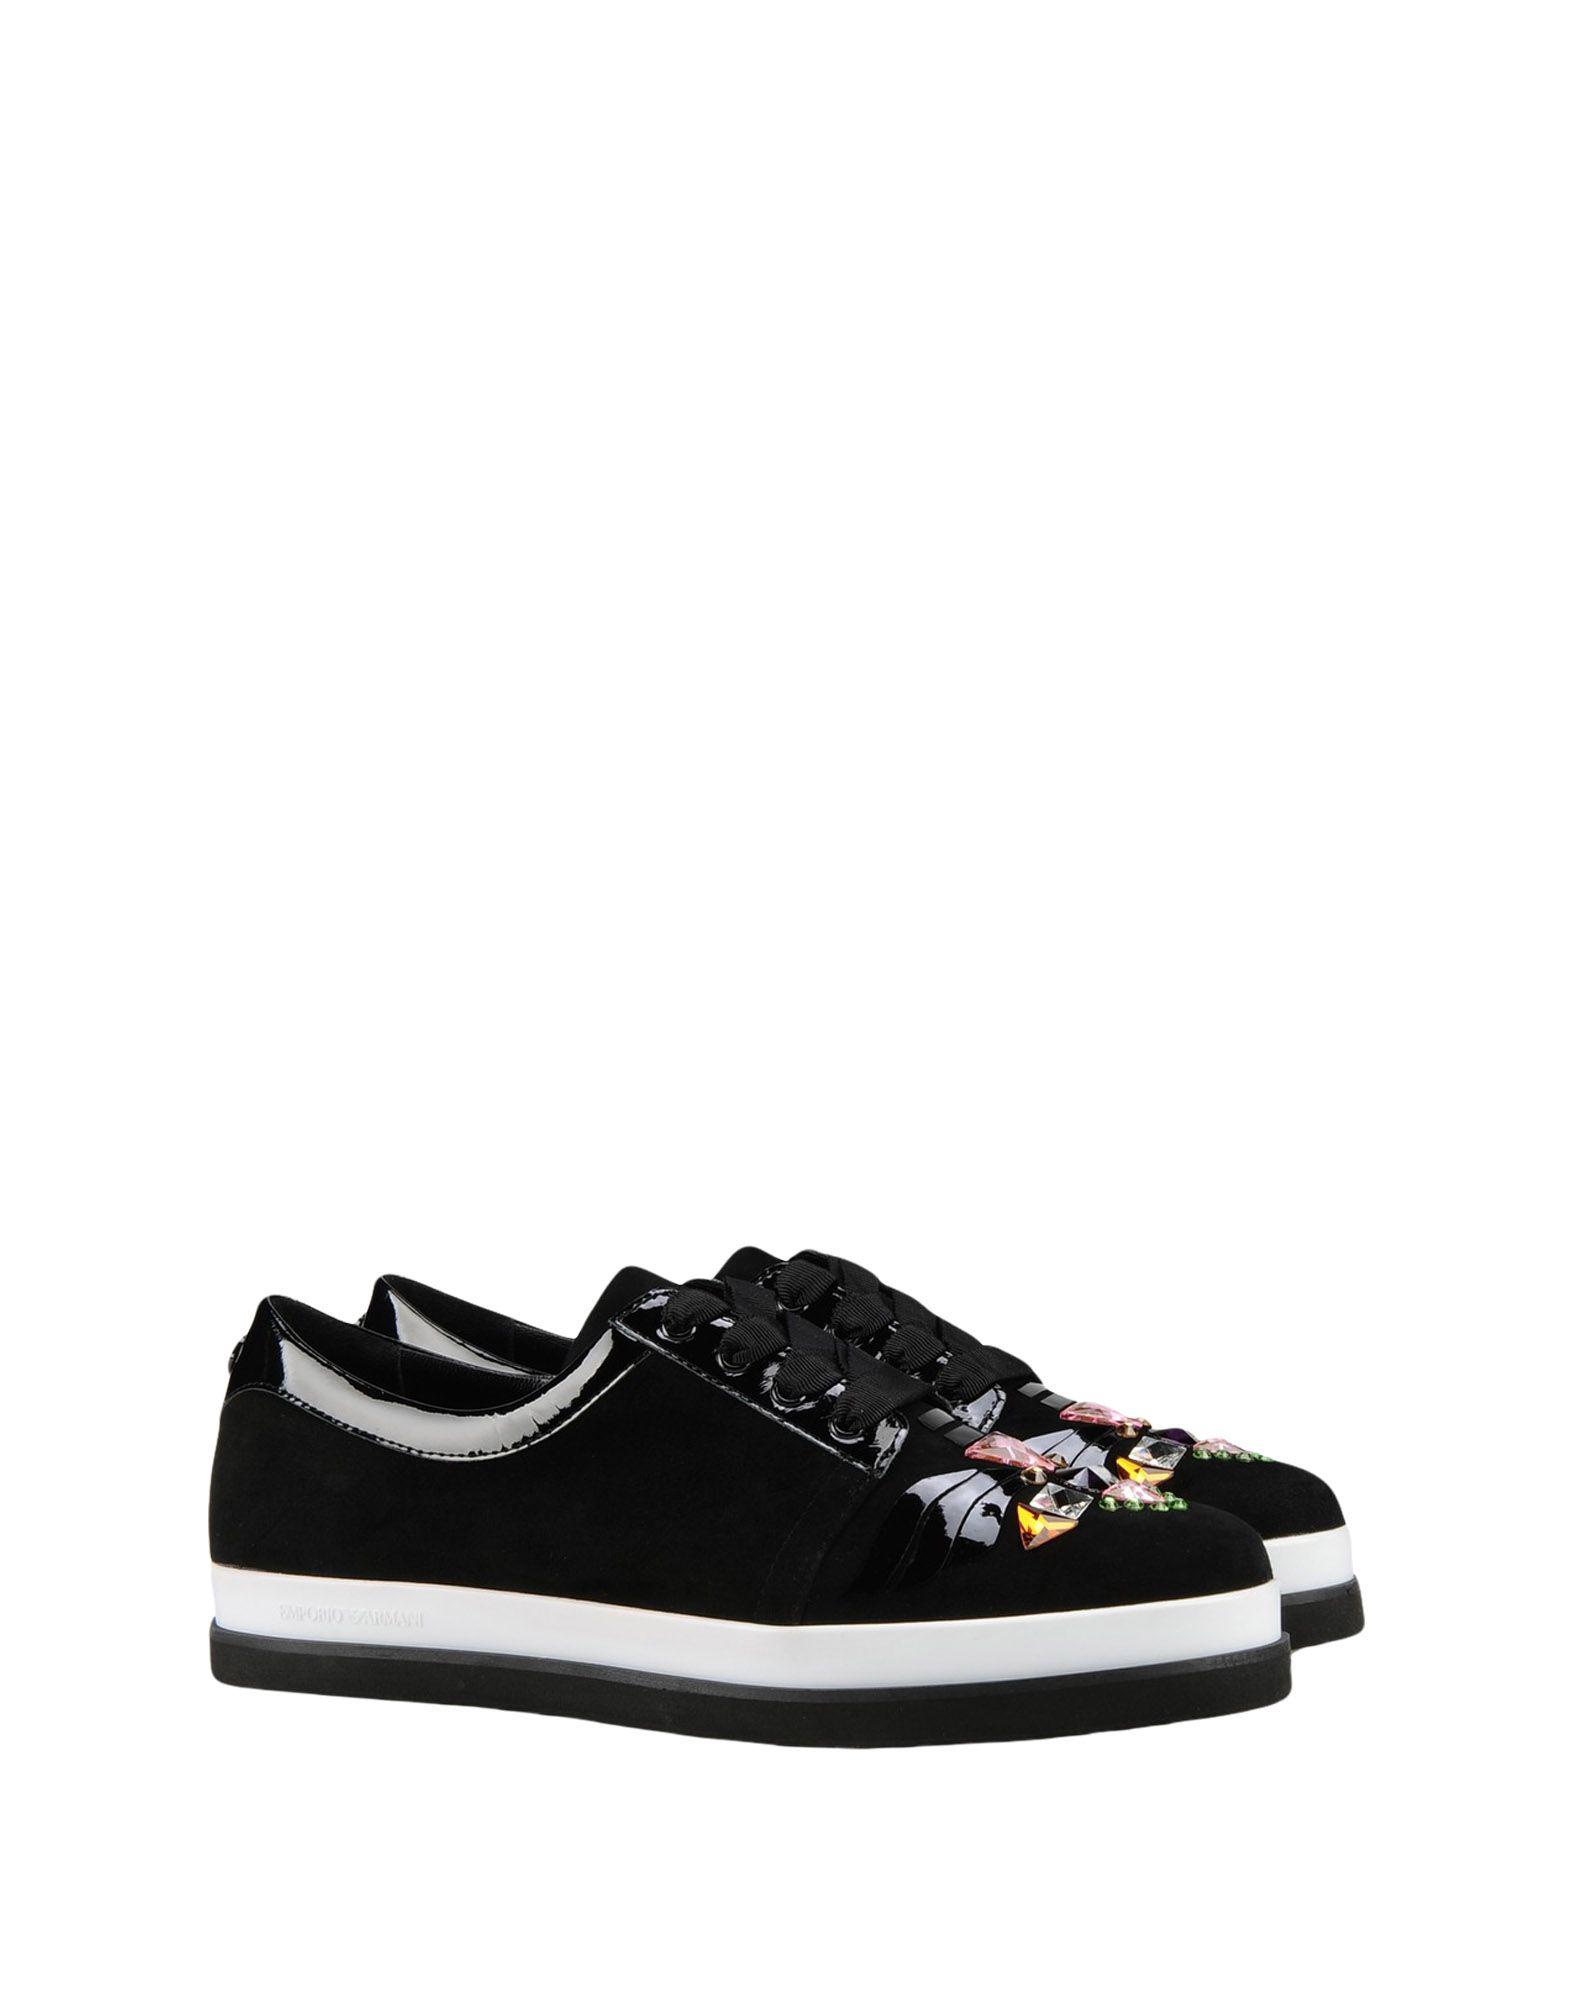 Emporio Armani Leather Sneakers in Black - Save 3% - Lyst